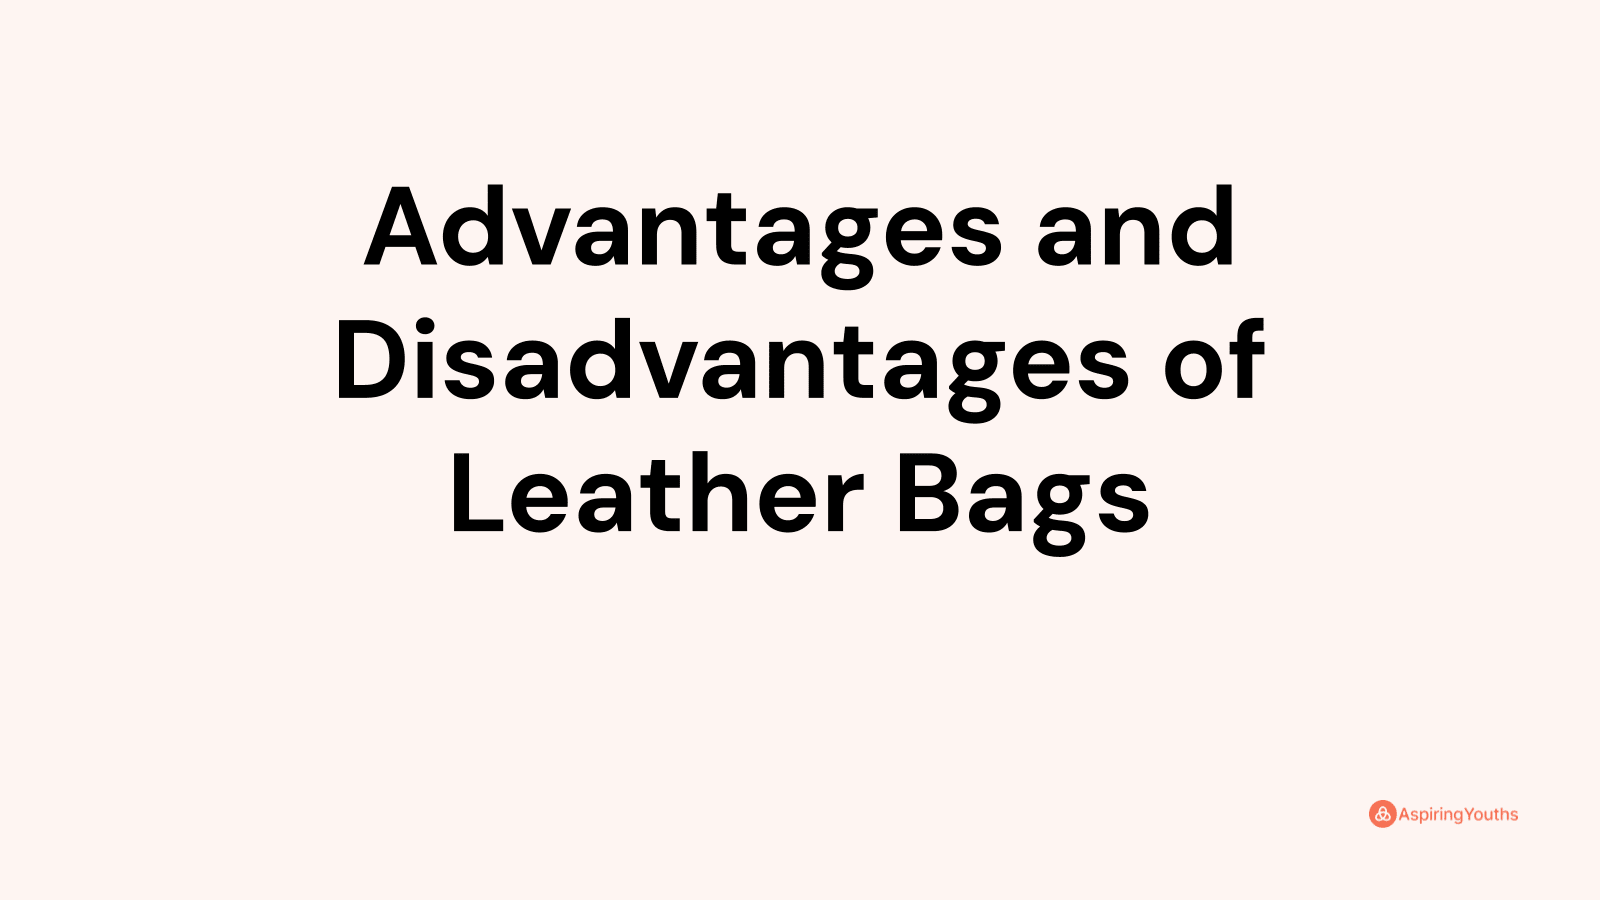 Advantages and Disadvantages of Leather Bags